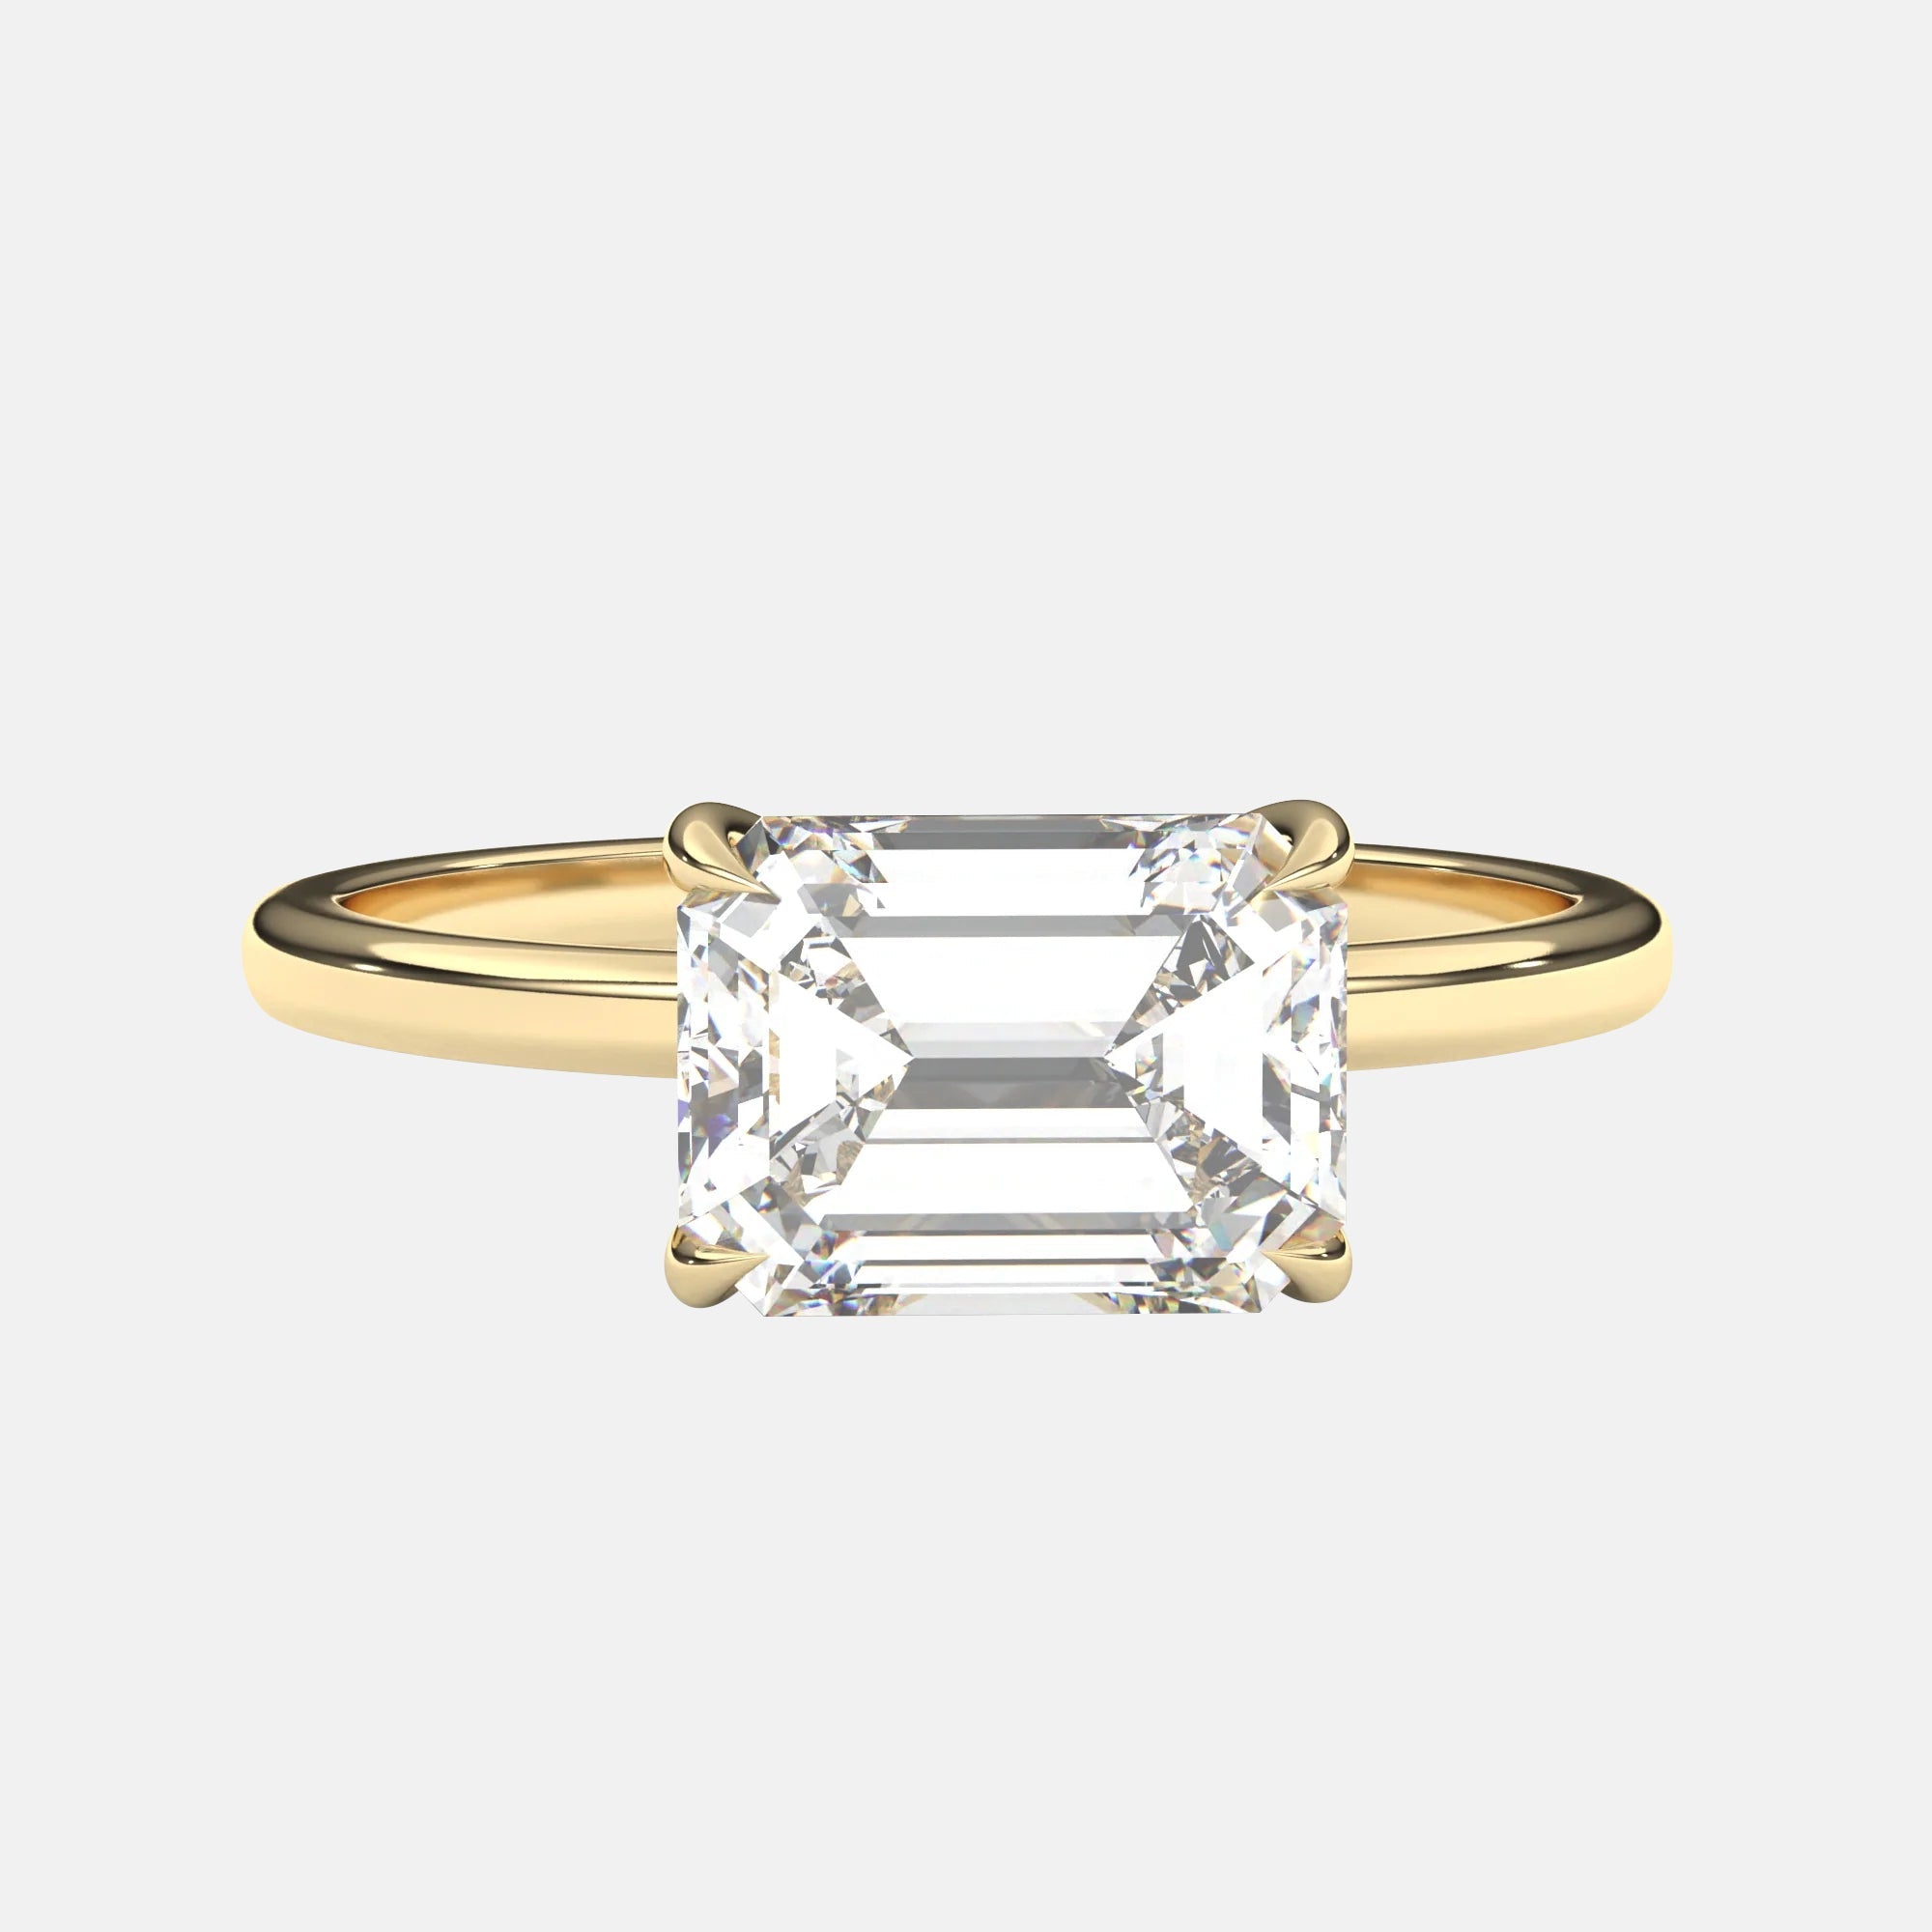 The Cora Ring - Horizontal Emerald Solitaire